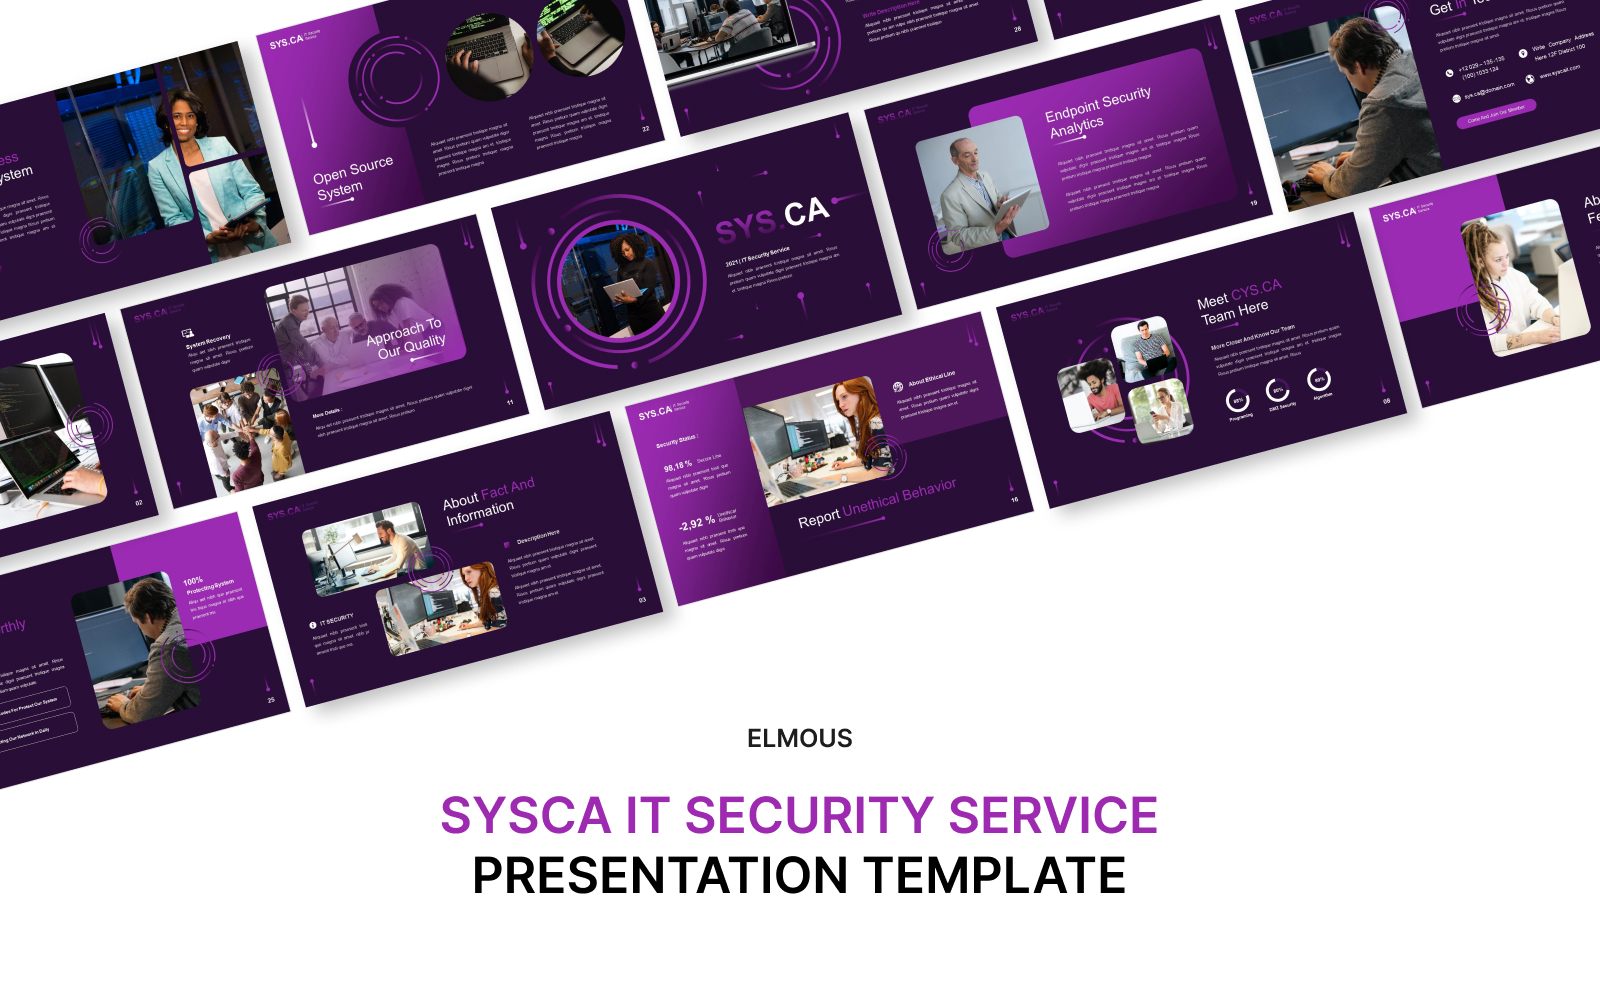 Sysca IT Security Service Keynote Presentation Template